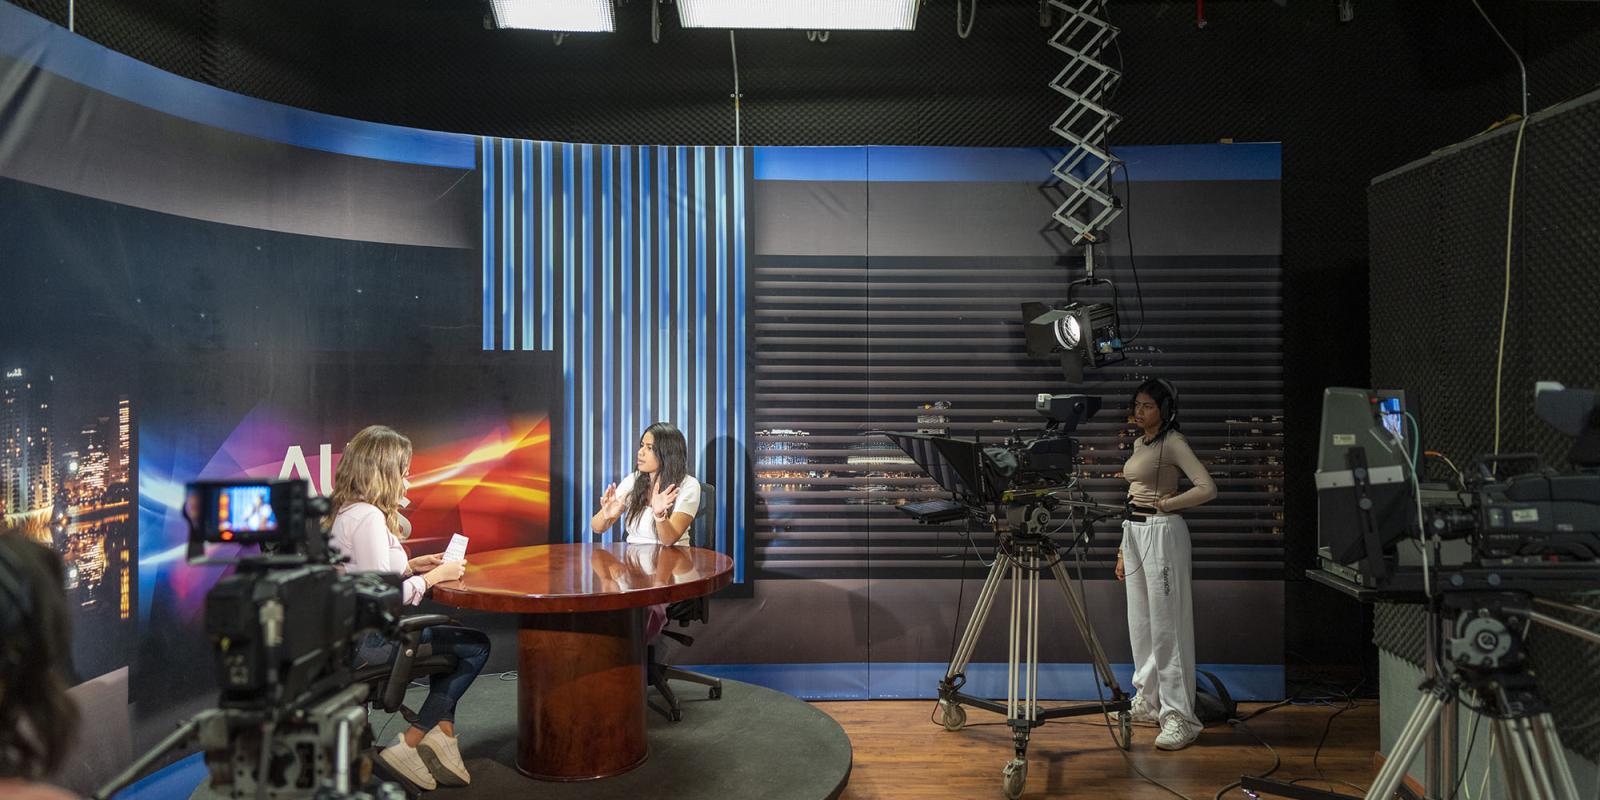 TV and journalism program image of a TV studio and students working in front and behind the camera